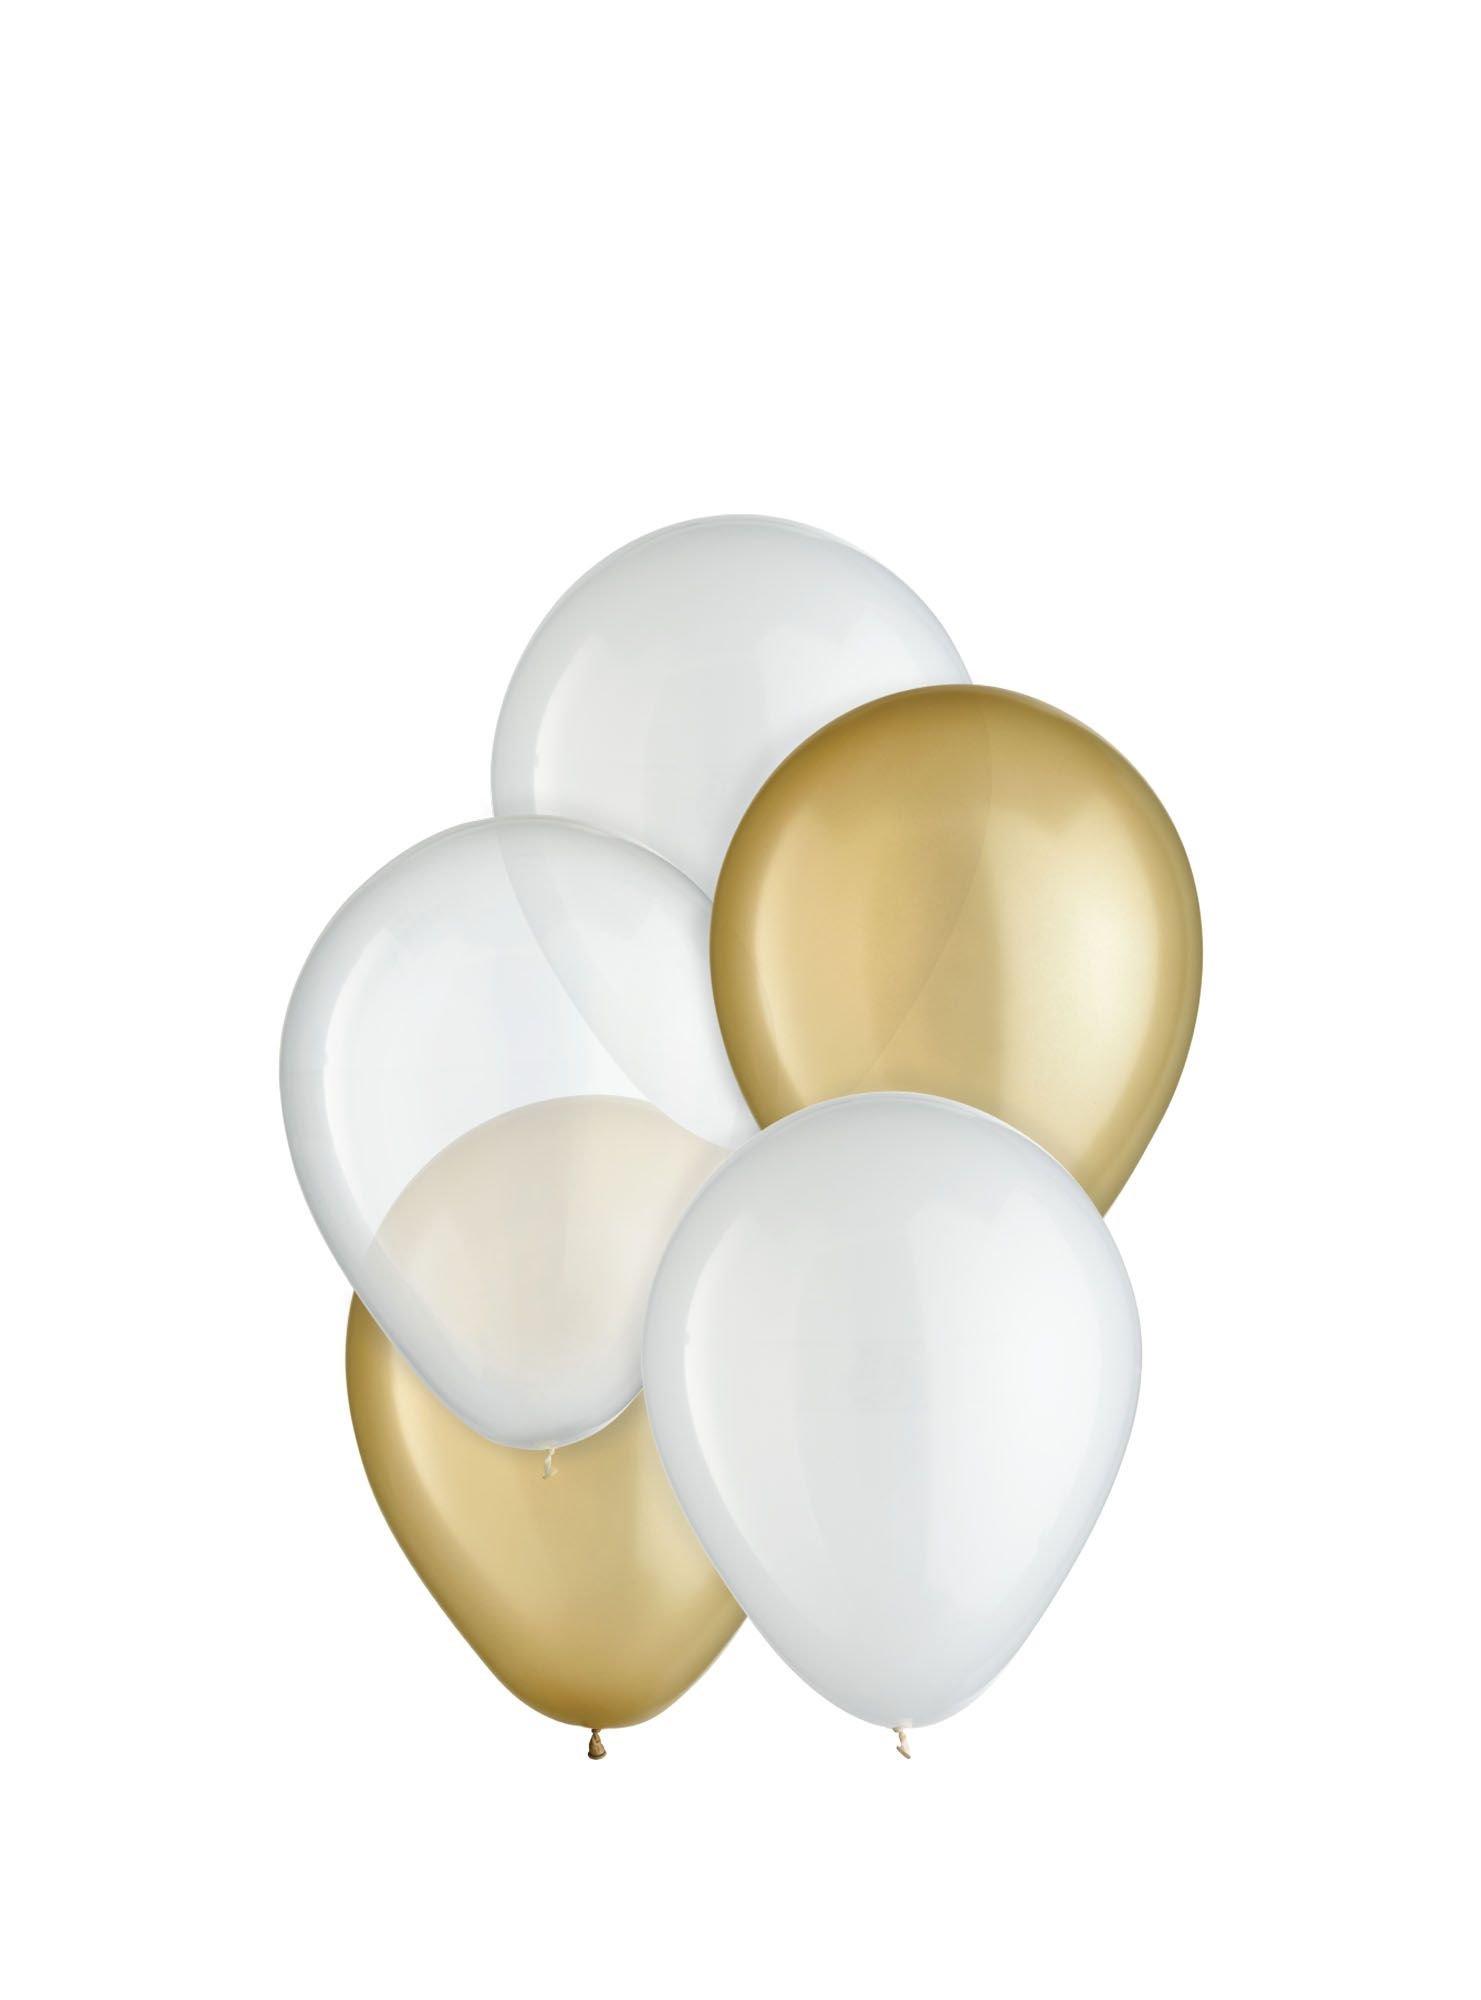 25ct, 5in, Golden 3-Color Mix Mini Latex Balloons - Clear, Gold